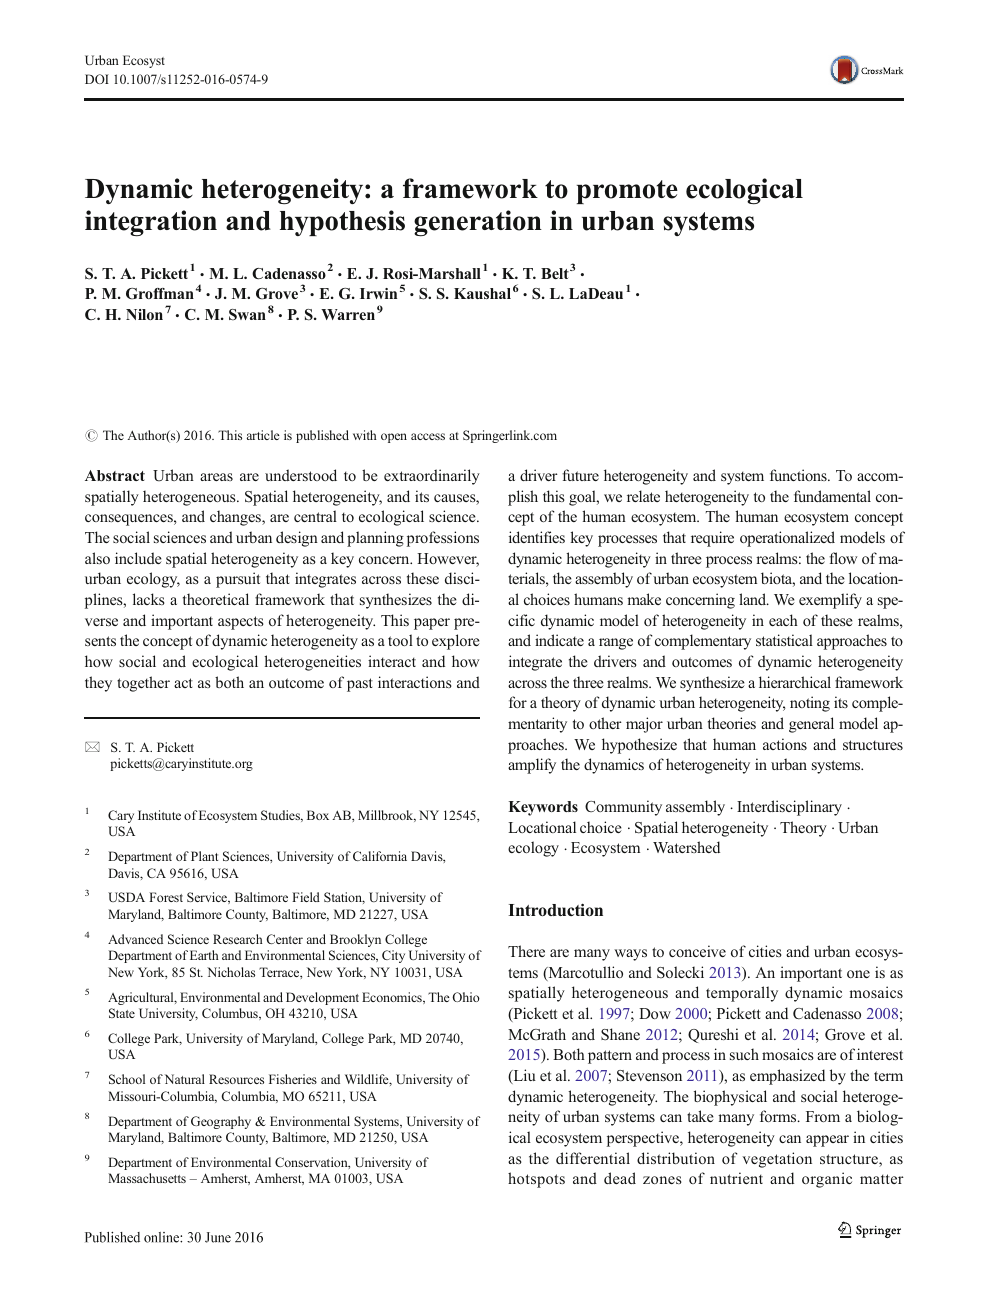 Dynamic Heterogeneity A Framework To Promote Ecological Integration And Hypothesis Generation In Urban Systems Topic Of Research Paper In Biological Sciences Download Scholarly Article Pdf And Read For Free On Cyberleninka